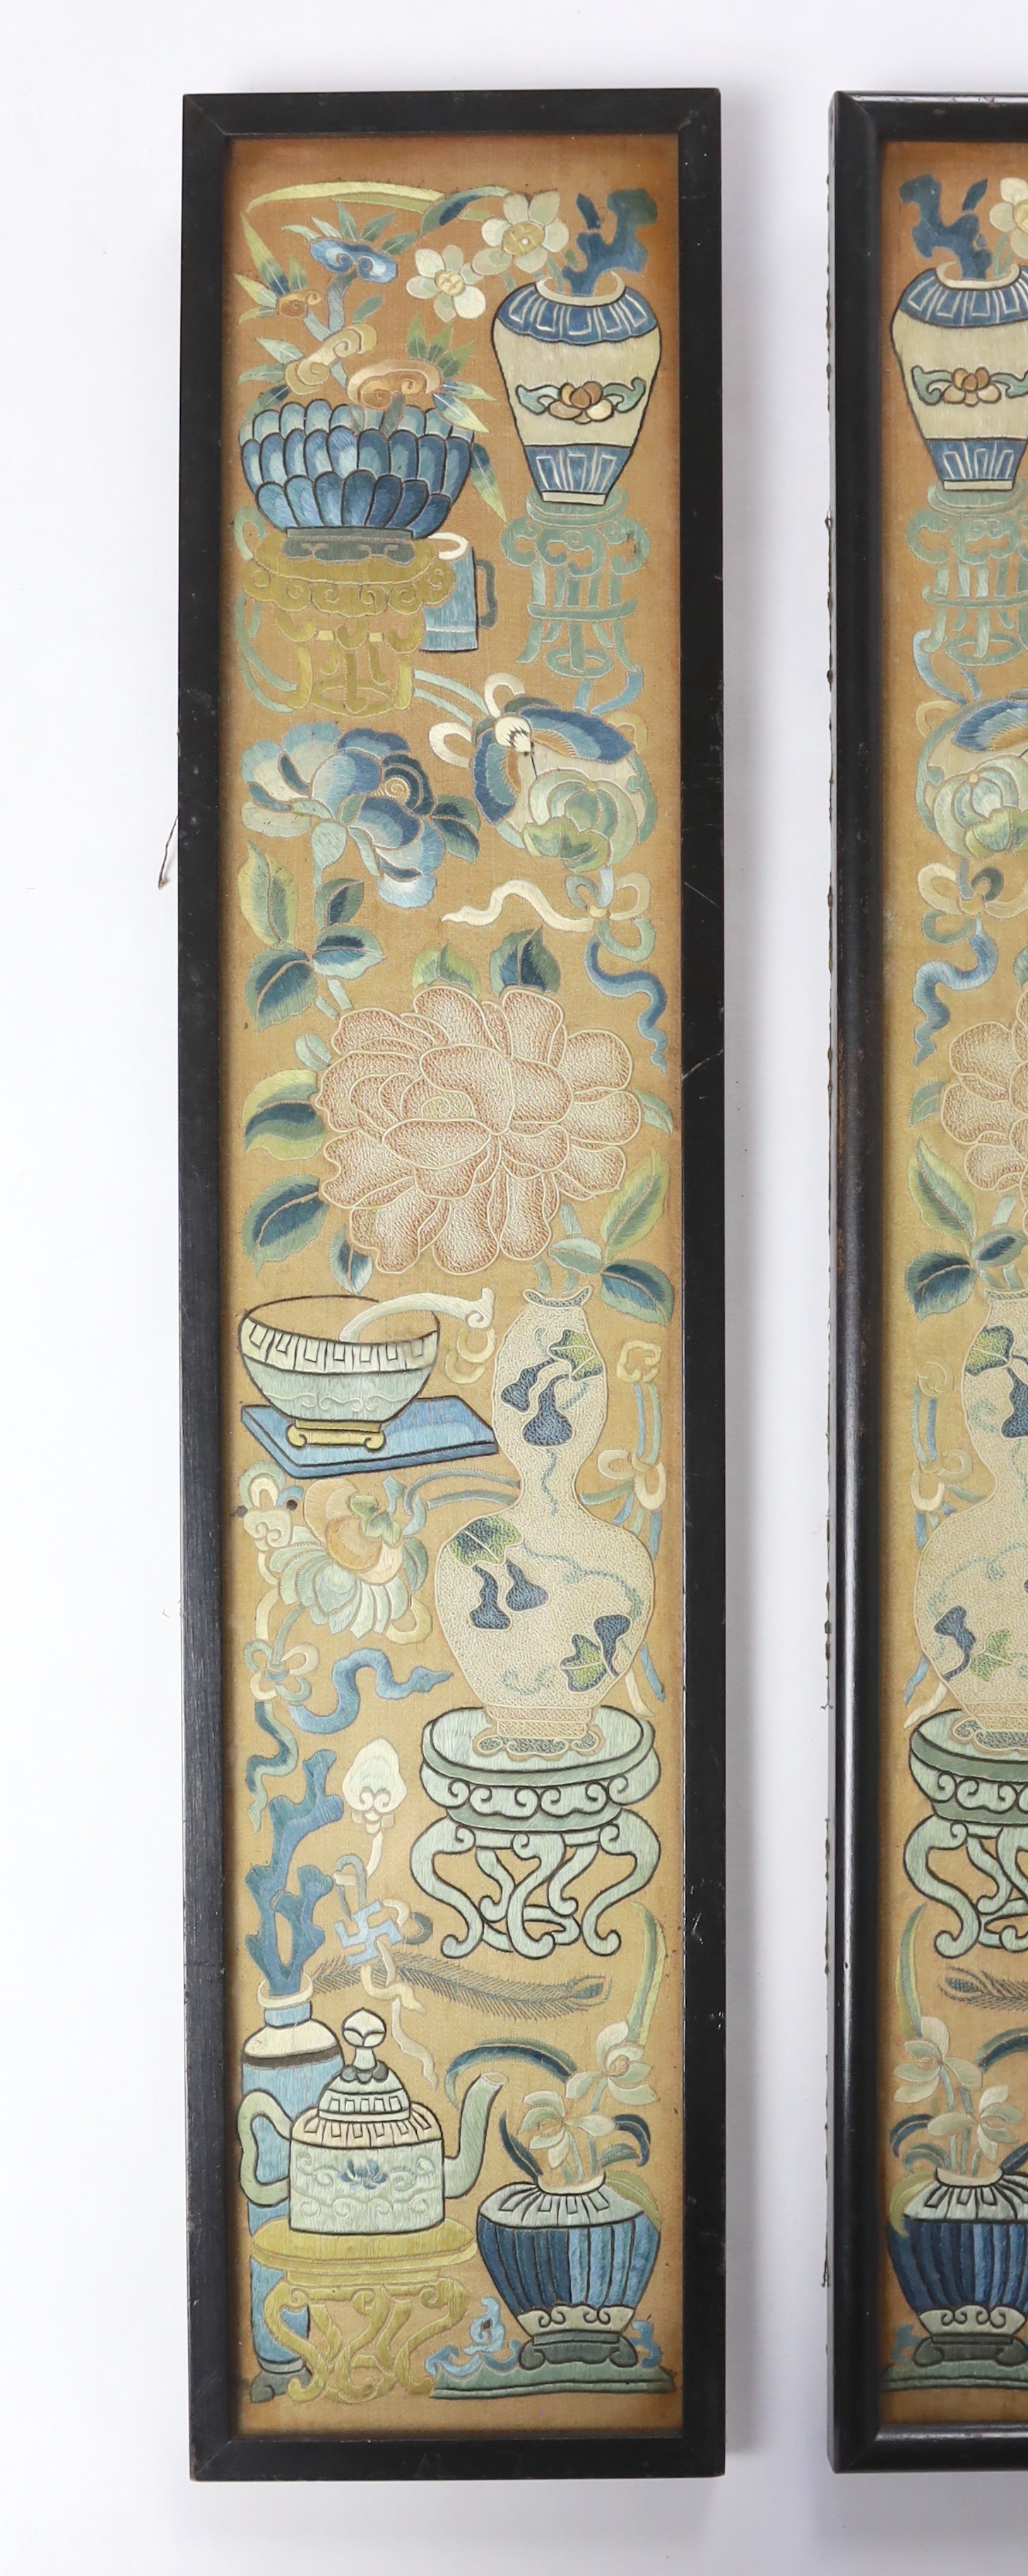 A pair of late 19th century / early 20th century Chinese silk embroidered sleeve bands, embroidered mostly with Chinese knot and stem stitch with unusual auspicious symbols each, 9.5cm wide x 49.5cm high (framed separate